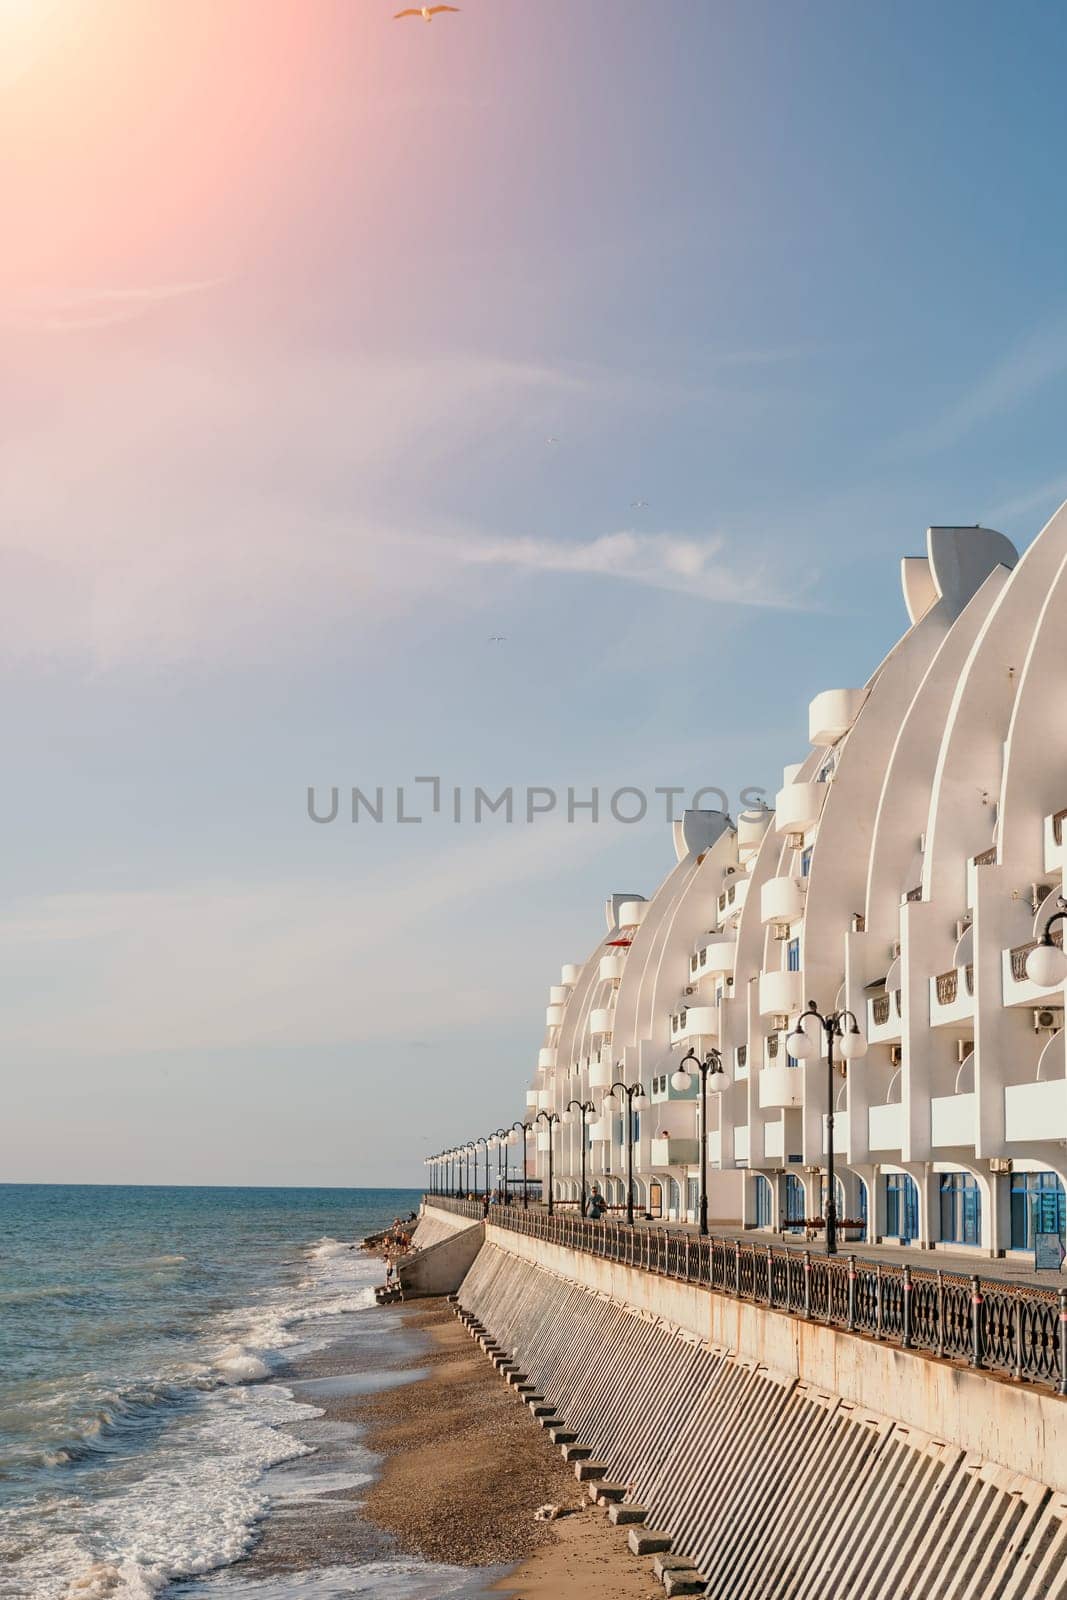 Coastal residential areas with a modern hotel and restaurant complex alongside sandy beaches. Summer holiday vacation and travel concept. by panophotograph